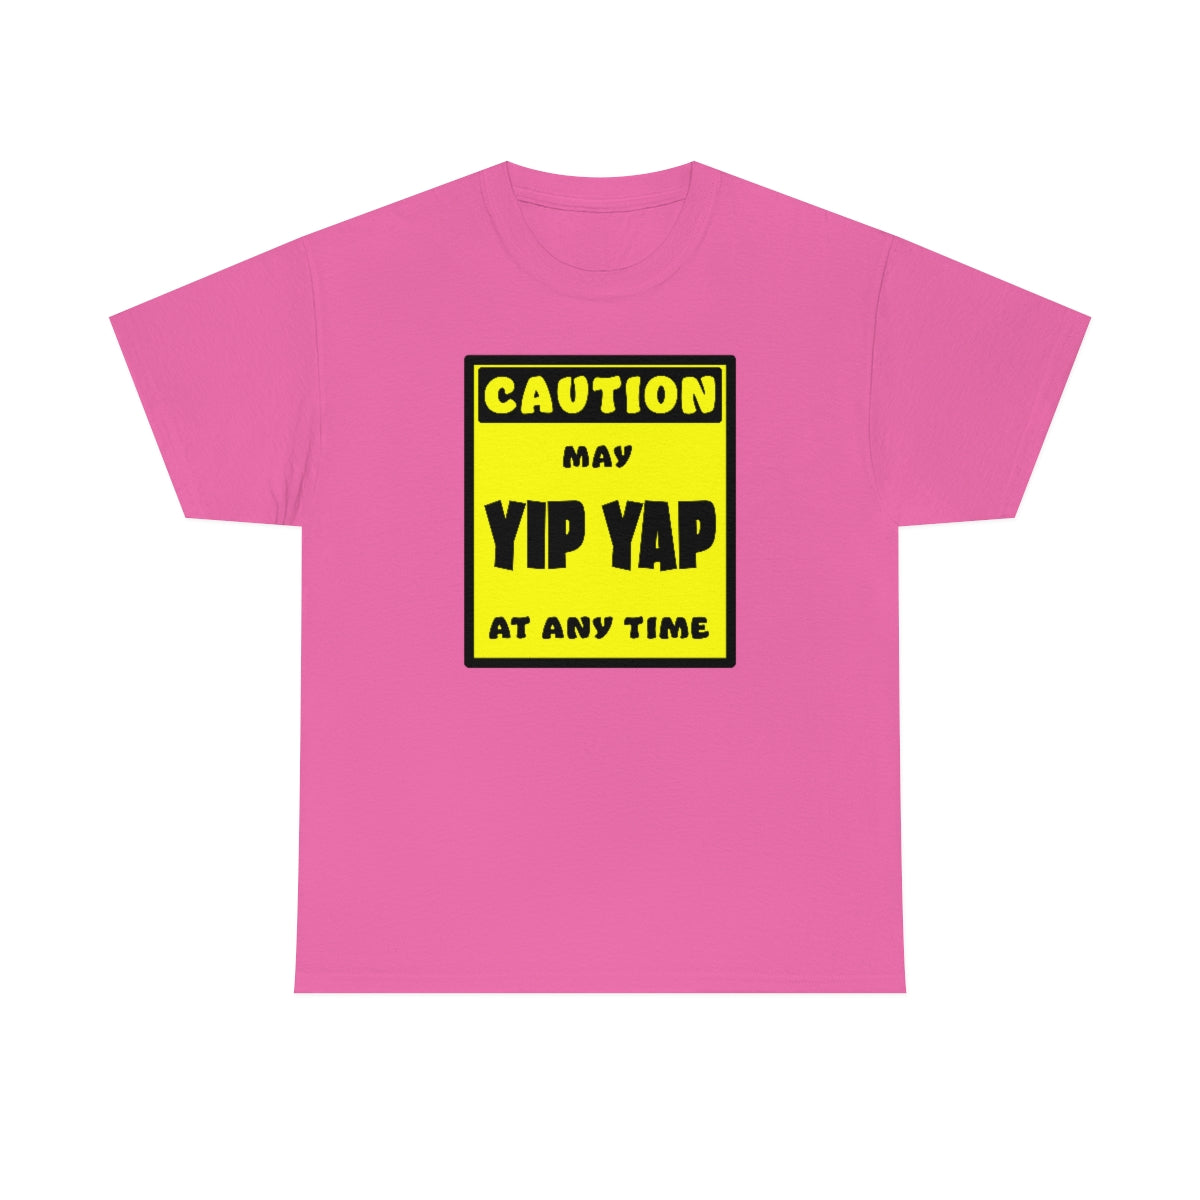 CAUTION! May Yip Yap at any time! - T-Shirt T-Shirt AFLT-Whootorca Pink S 